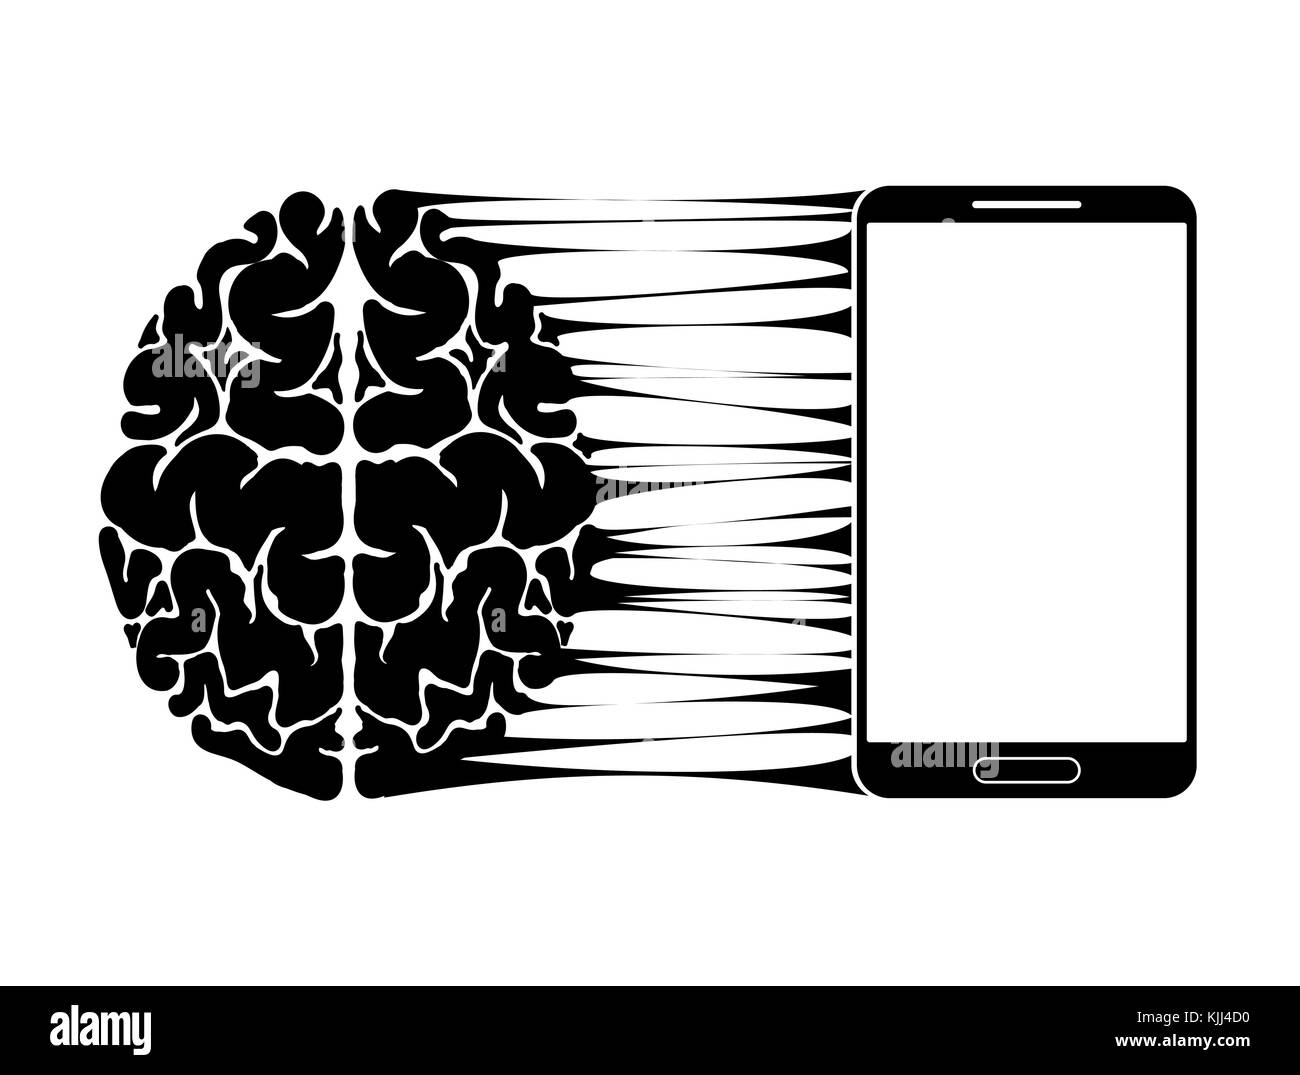 A conceptual sign or logo showing a person s dependence on a smartphone, gadget or the Internet. Strong communication of the brain and new technologies. Stock Vector